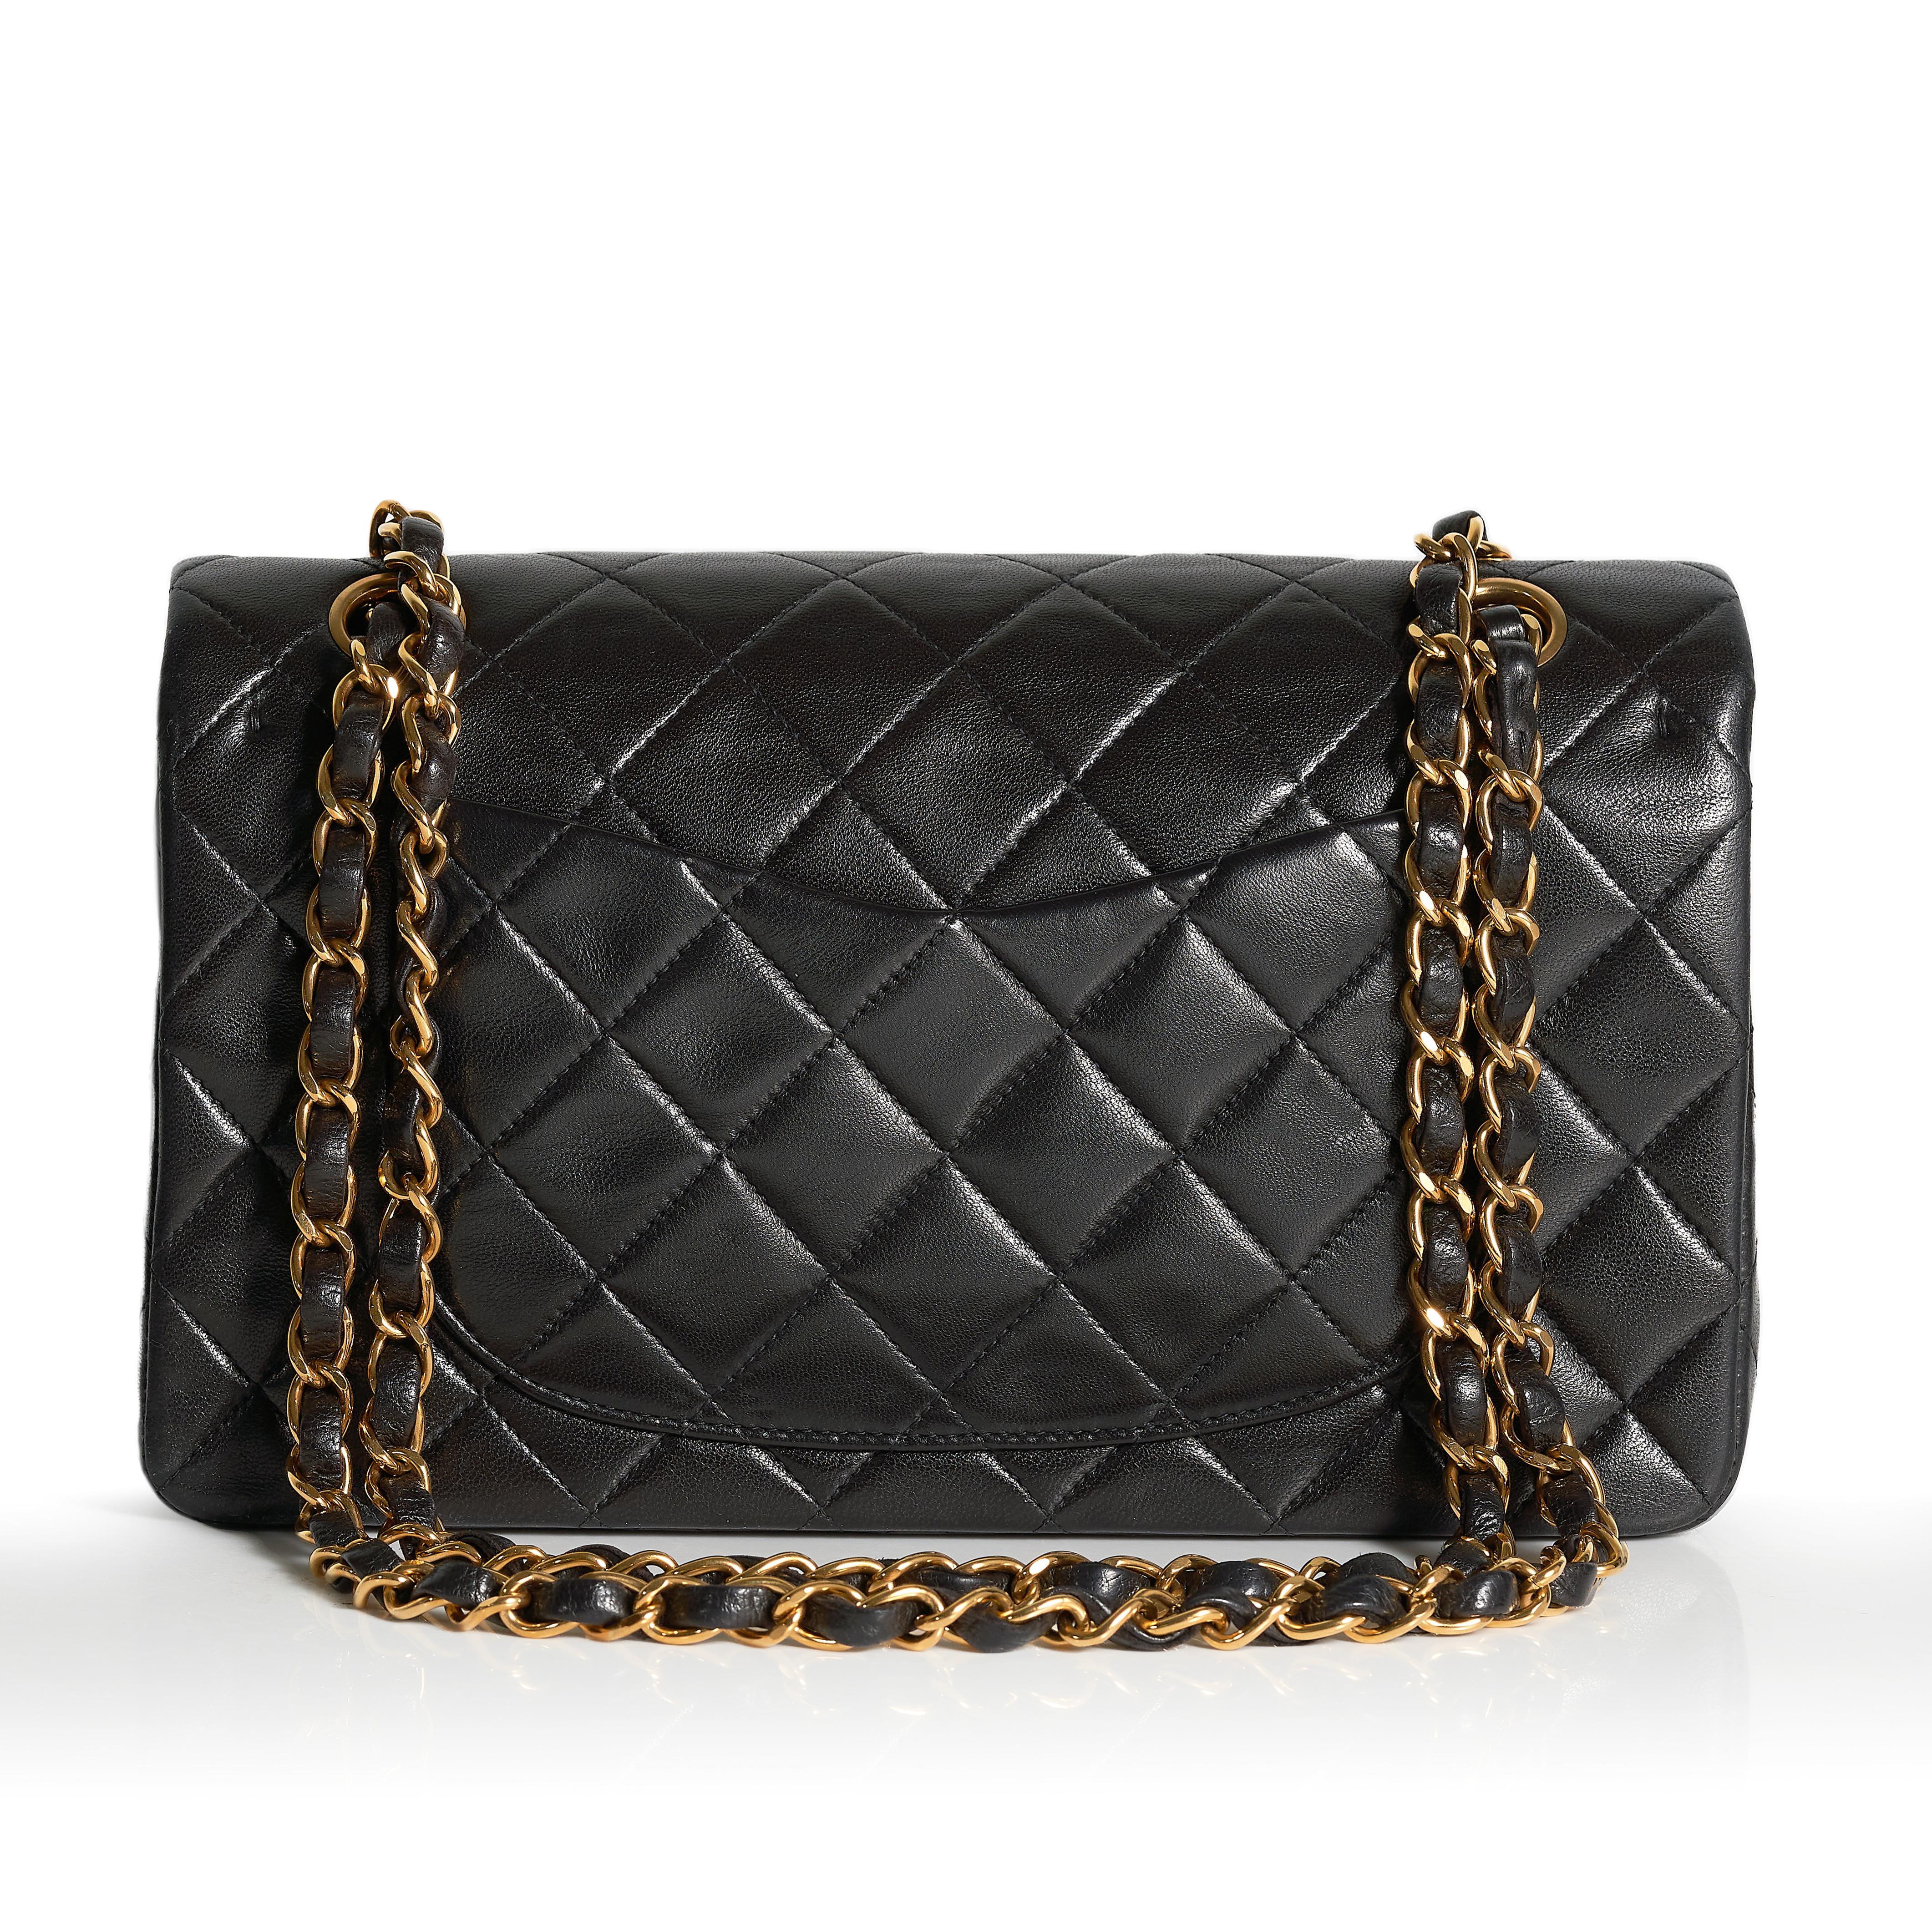 CHANEL, A VINTAGE BLACK QUILTED LAMB LEATHER 9" DOUBLE FLAP BAG quilted lamb leather, gold tone - Image 2 of 3